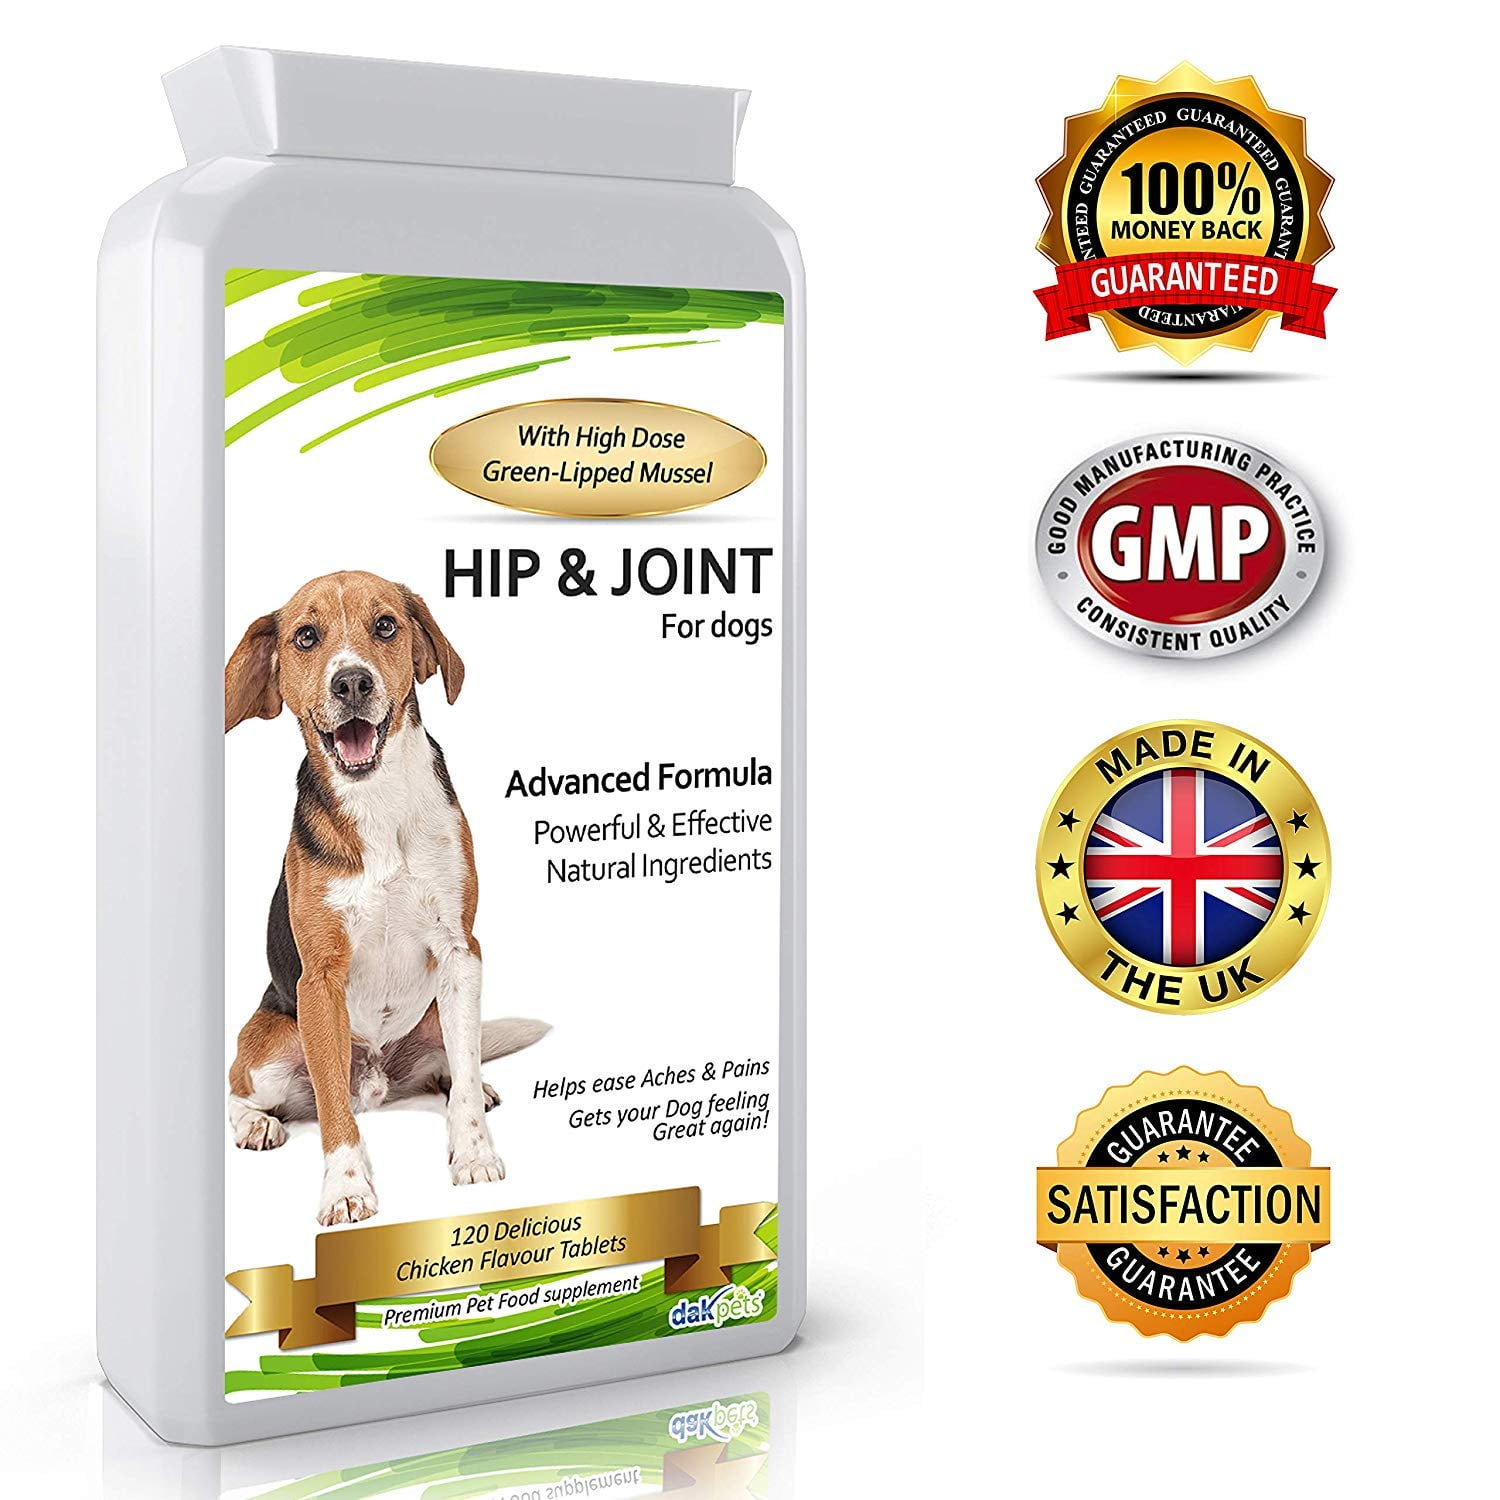 glucosamine chondroitin and green lipped mussel